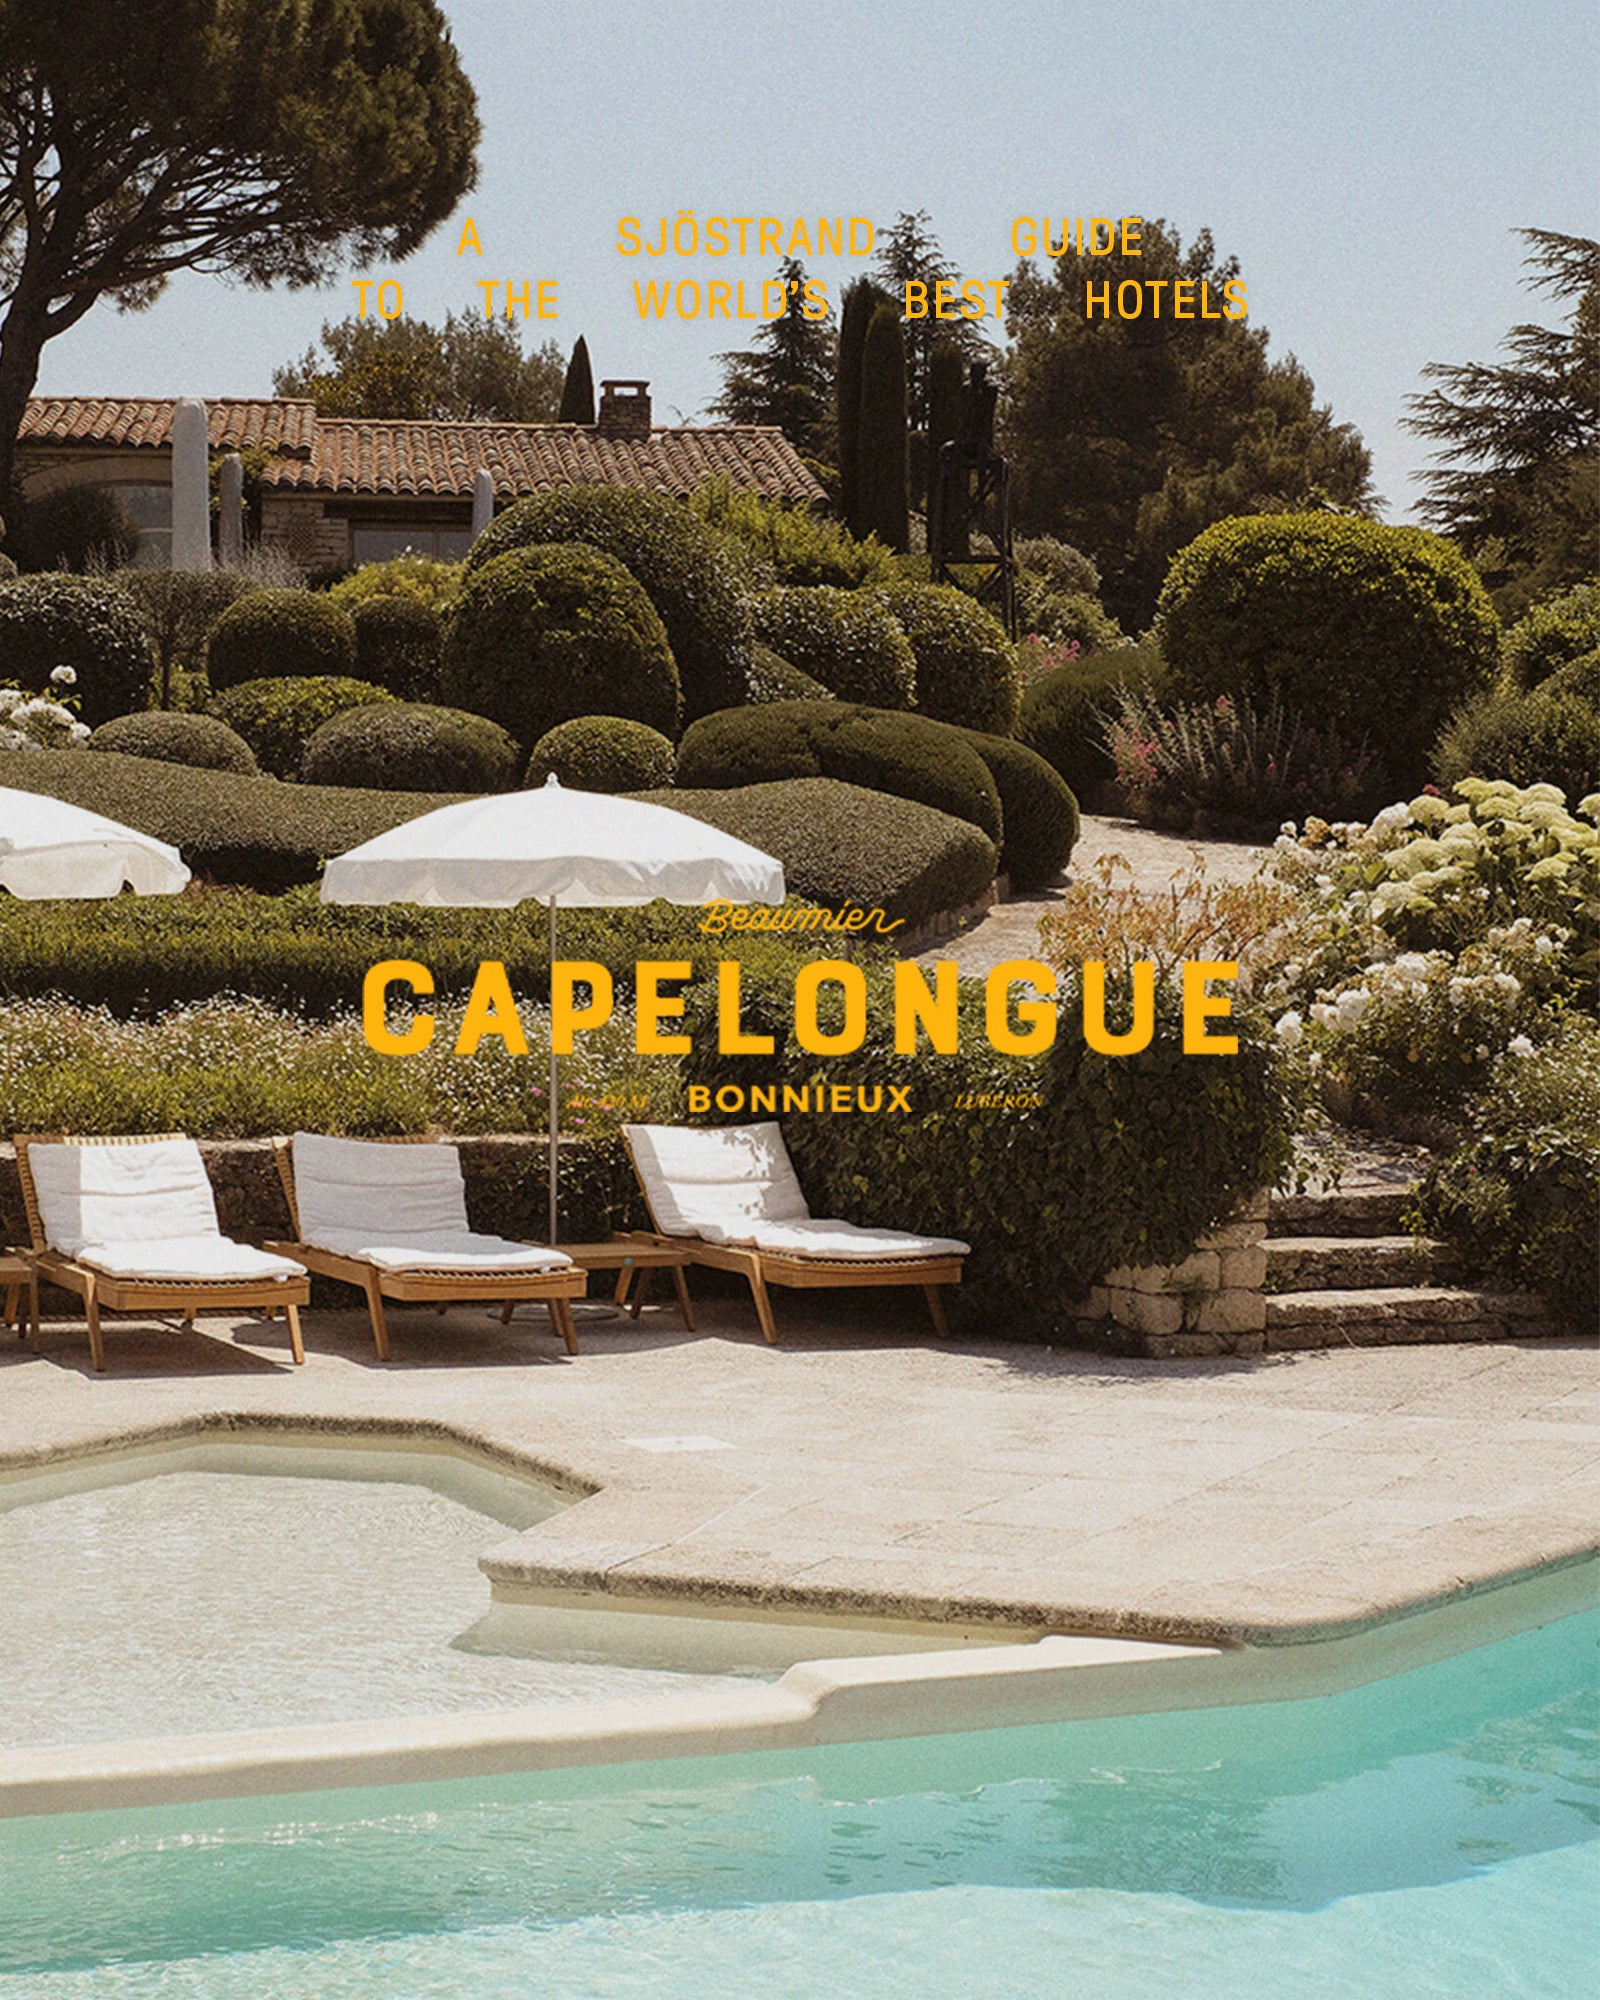 Capelongue - The  heritage and embodiment of Provence article image